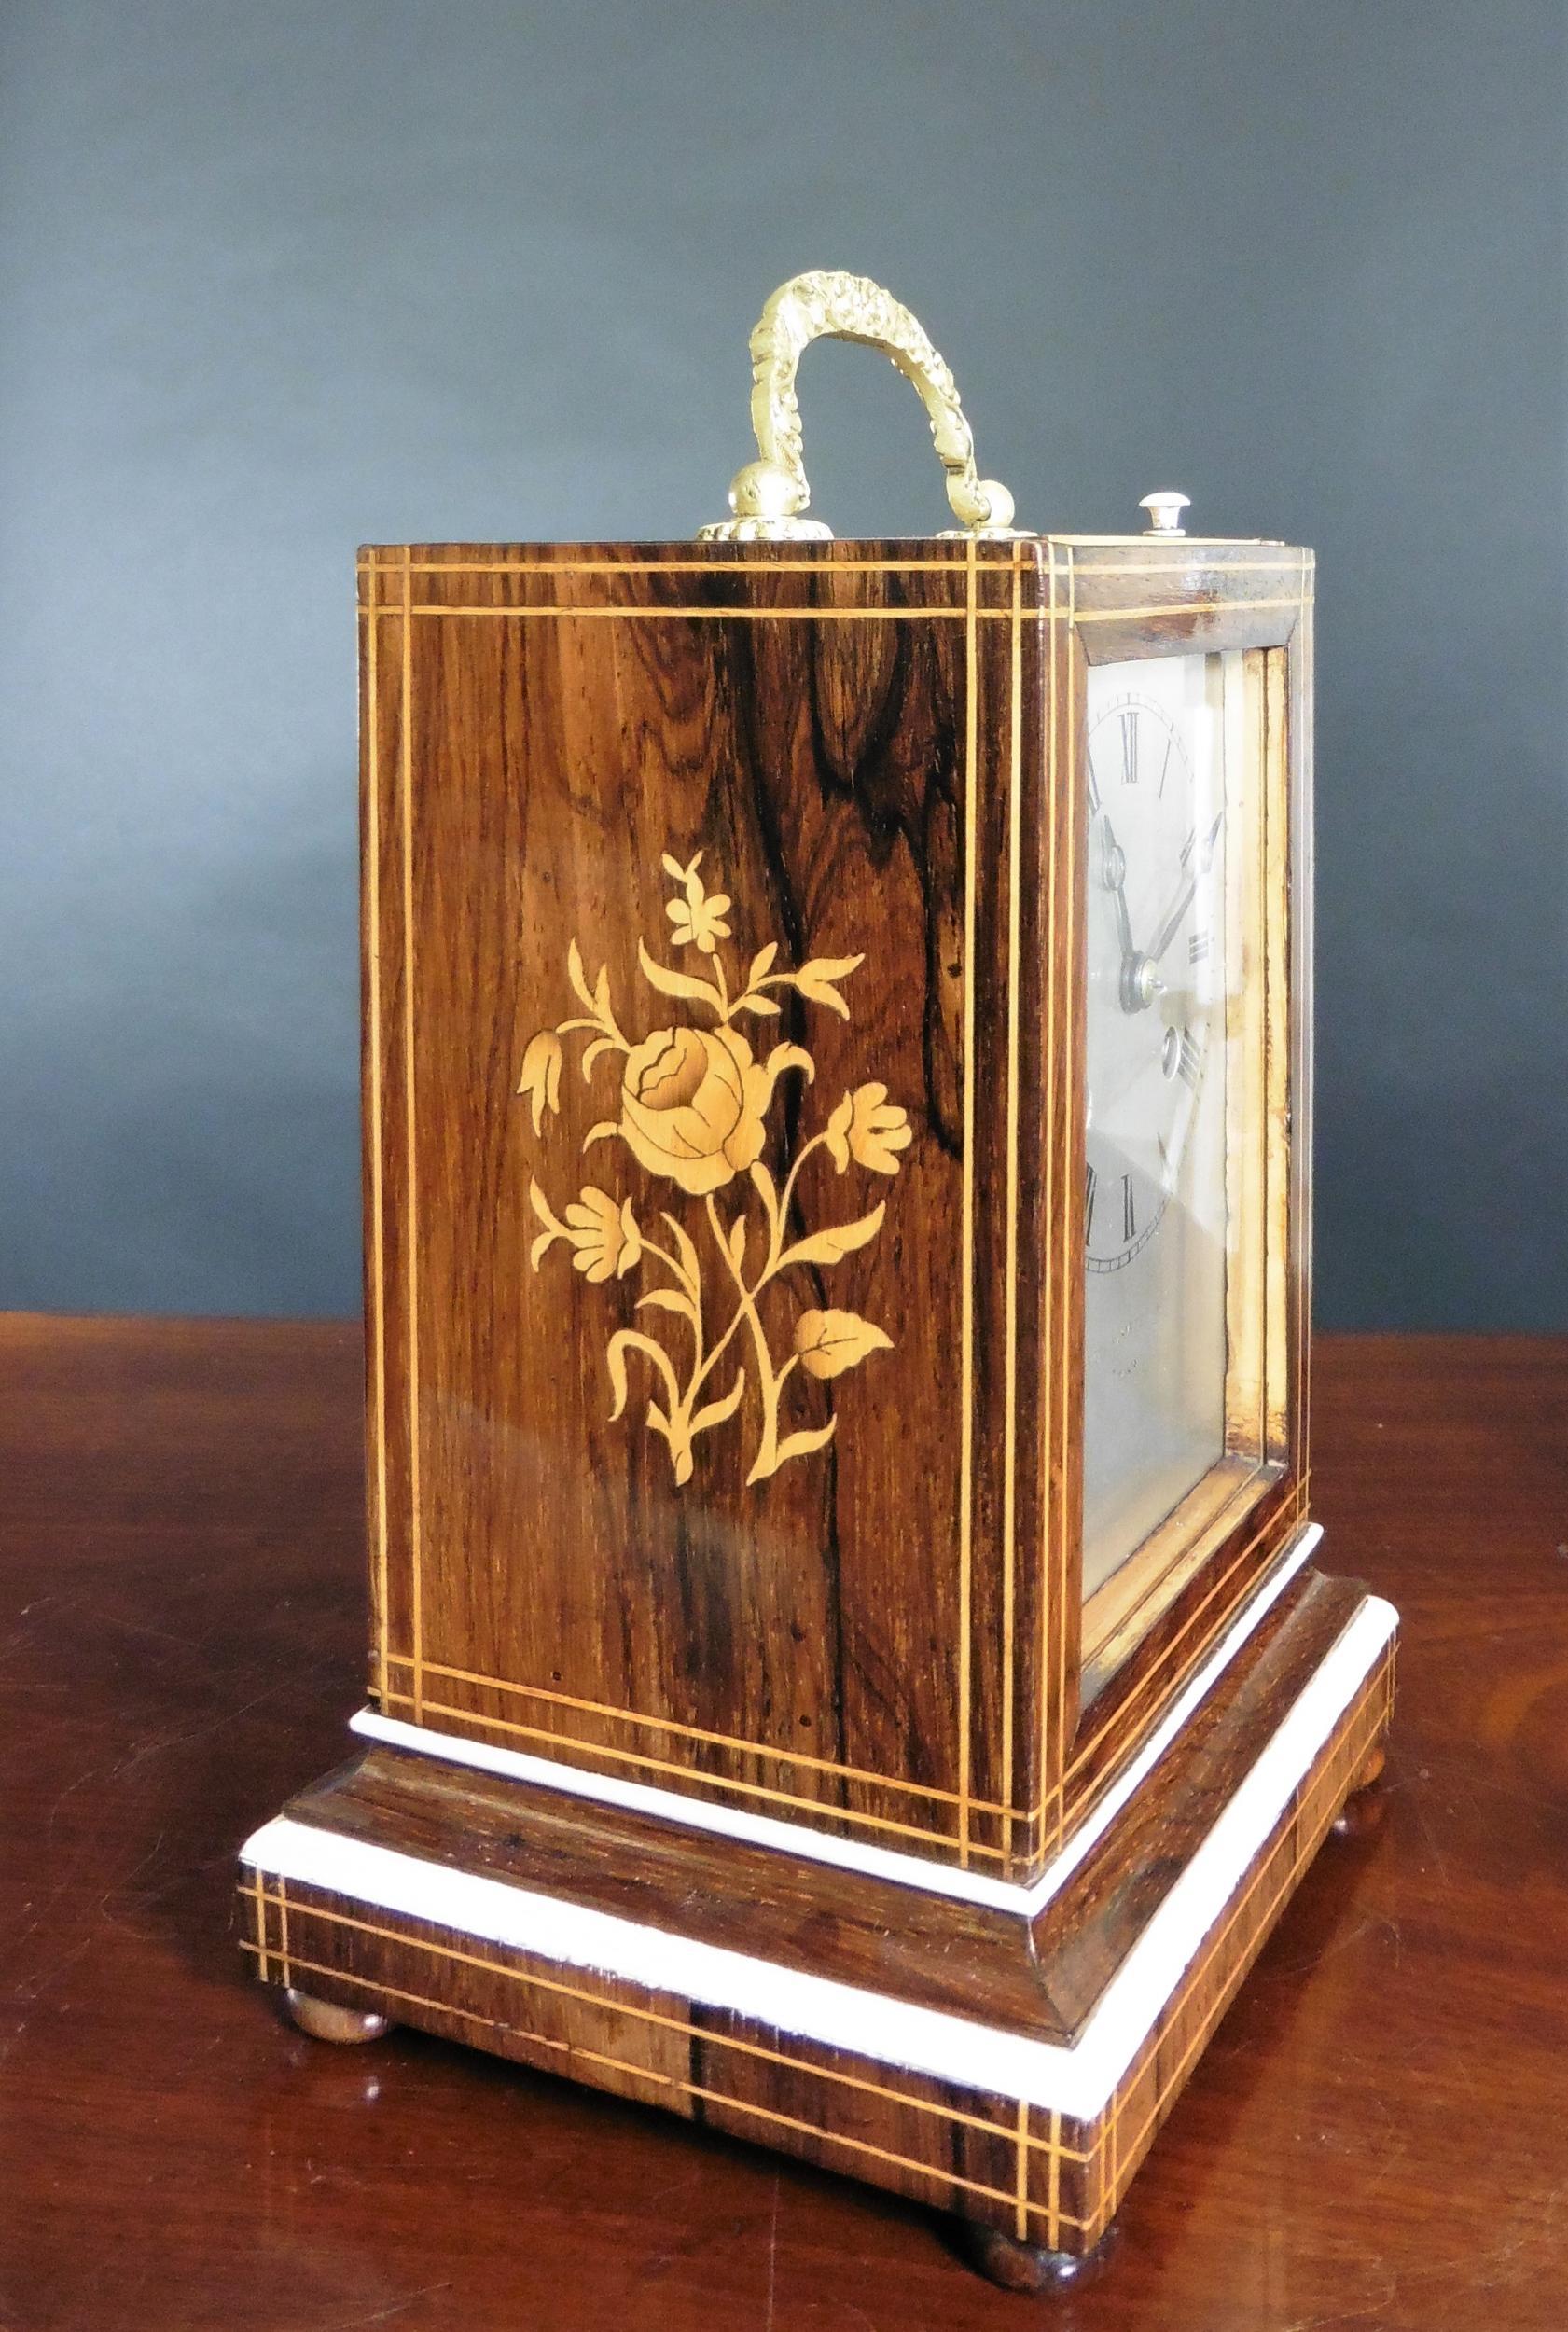 French rosewood campaign clock

French campaign clock in a finely figured rosewood case standing on a raised moulded plinth, both sides inlaid with satinwood floral decoration and resting on four turned bun feet.

Glazed opening front revealing